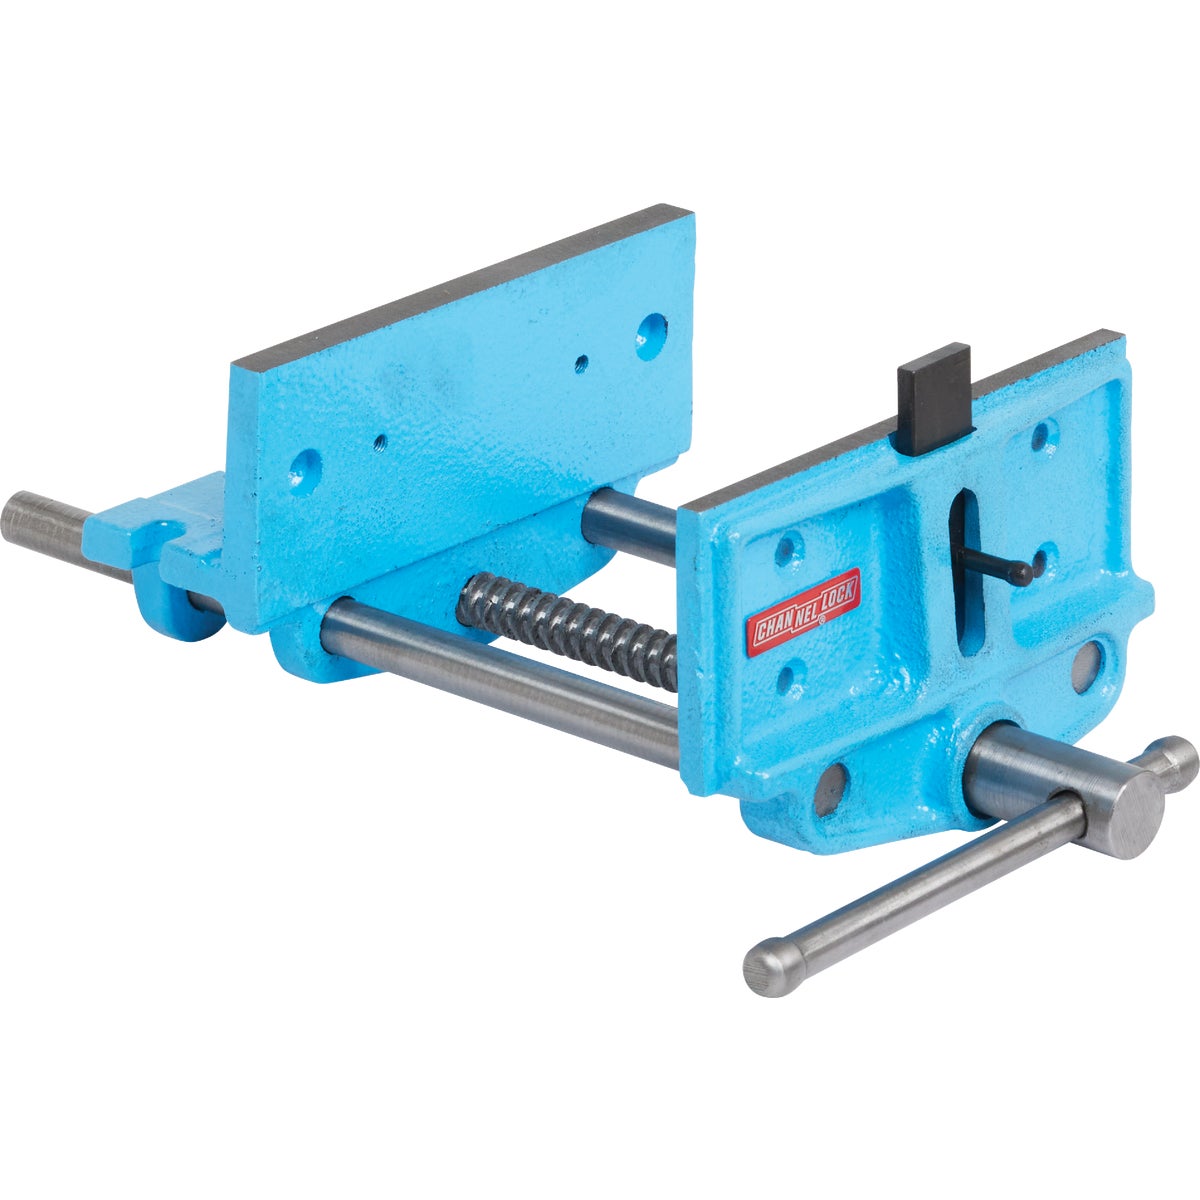 Channellock 7 In. Woodworker's Vise